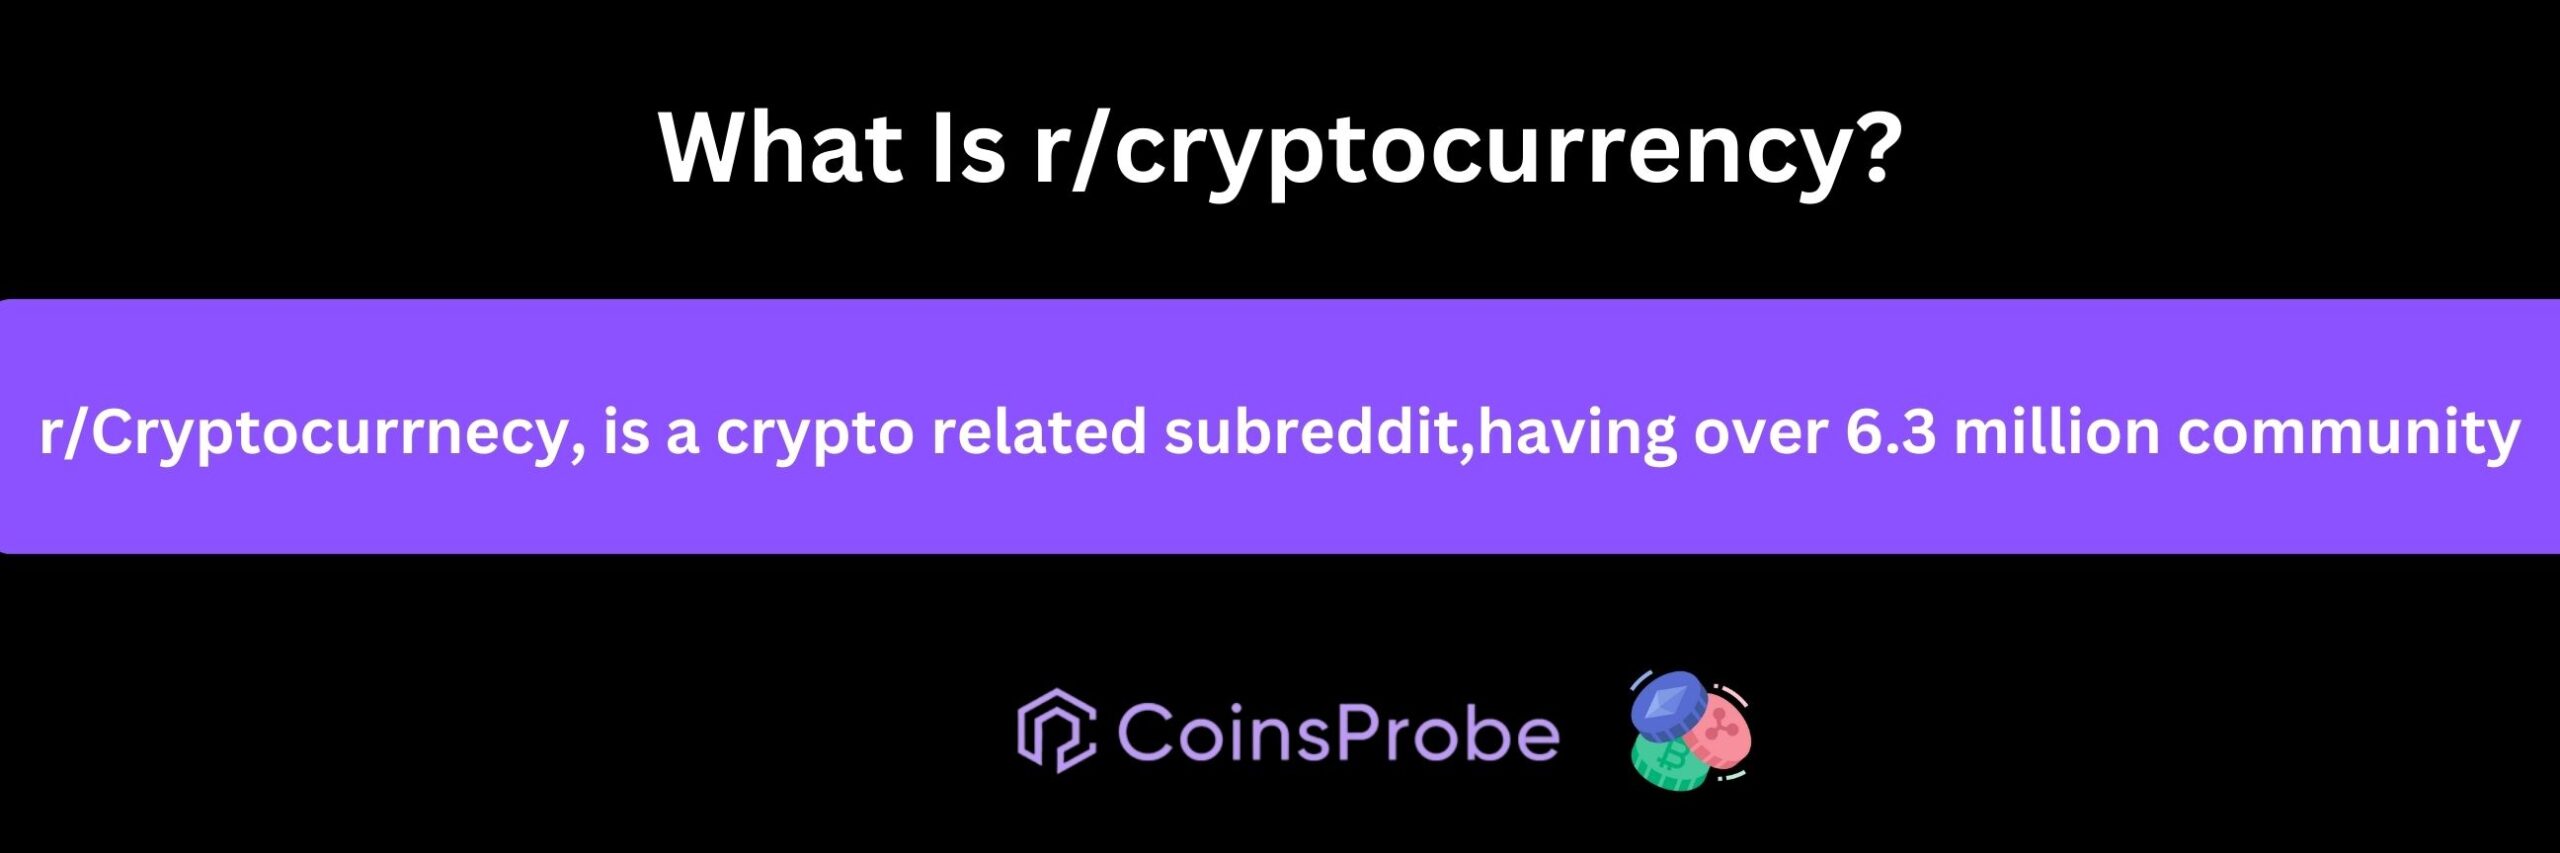 what is r/crptocurrency